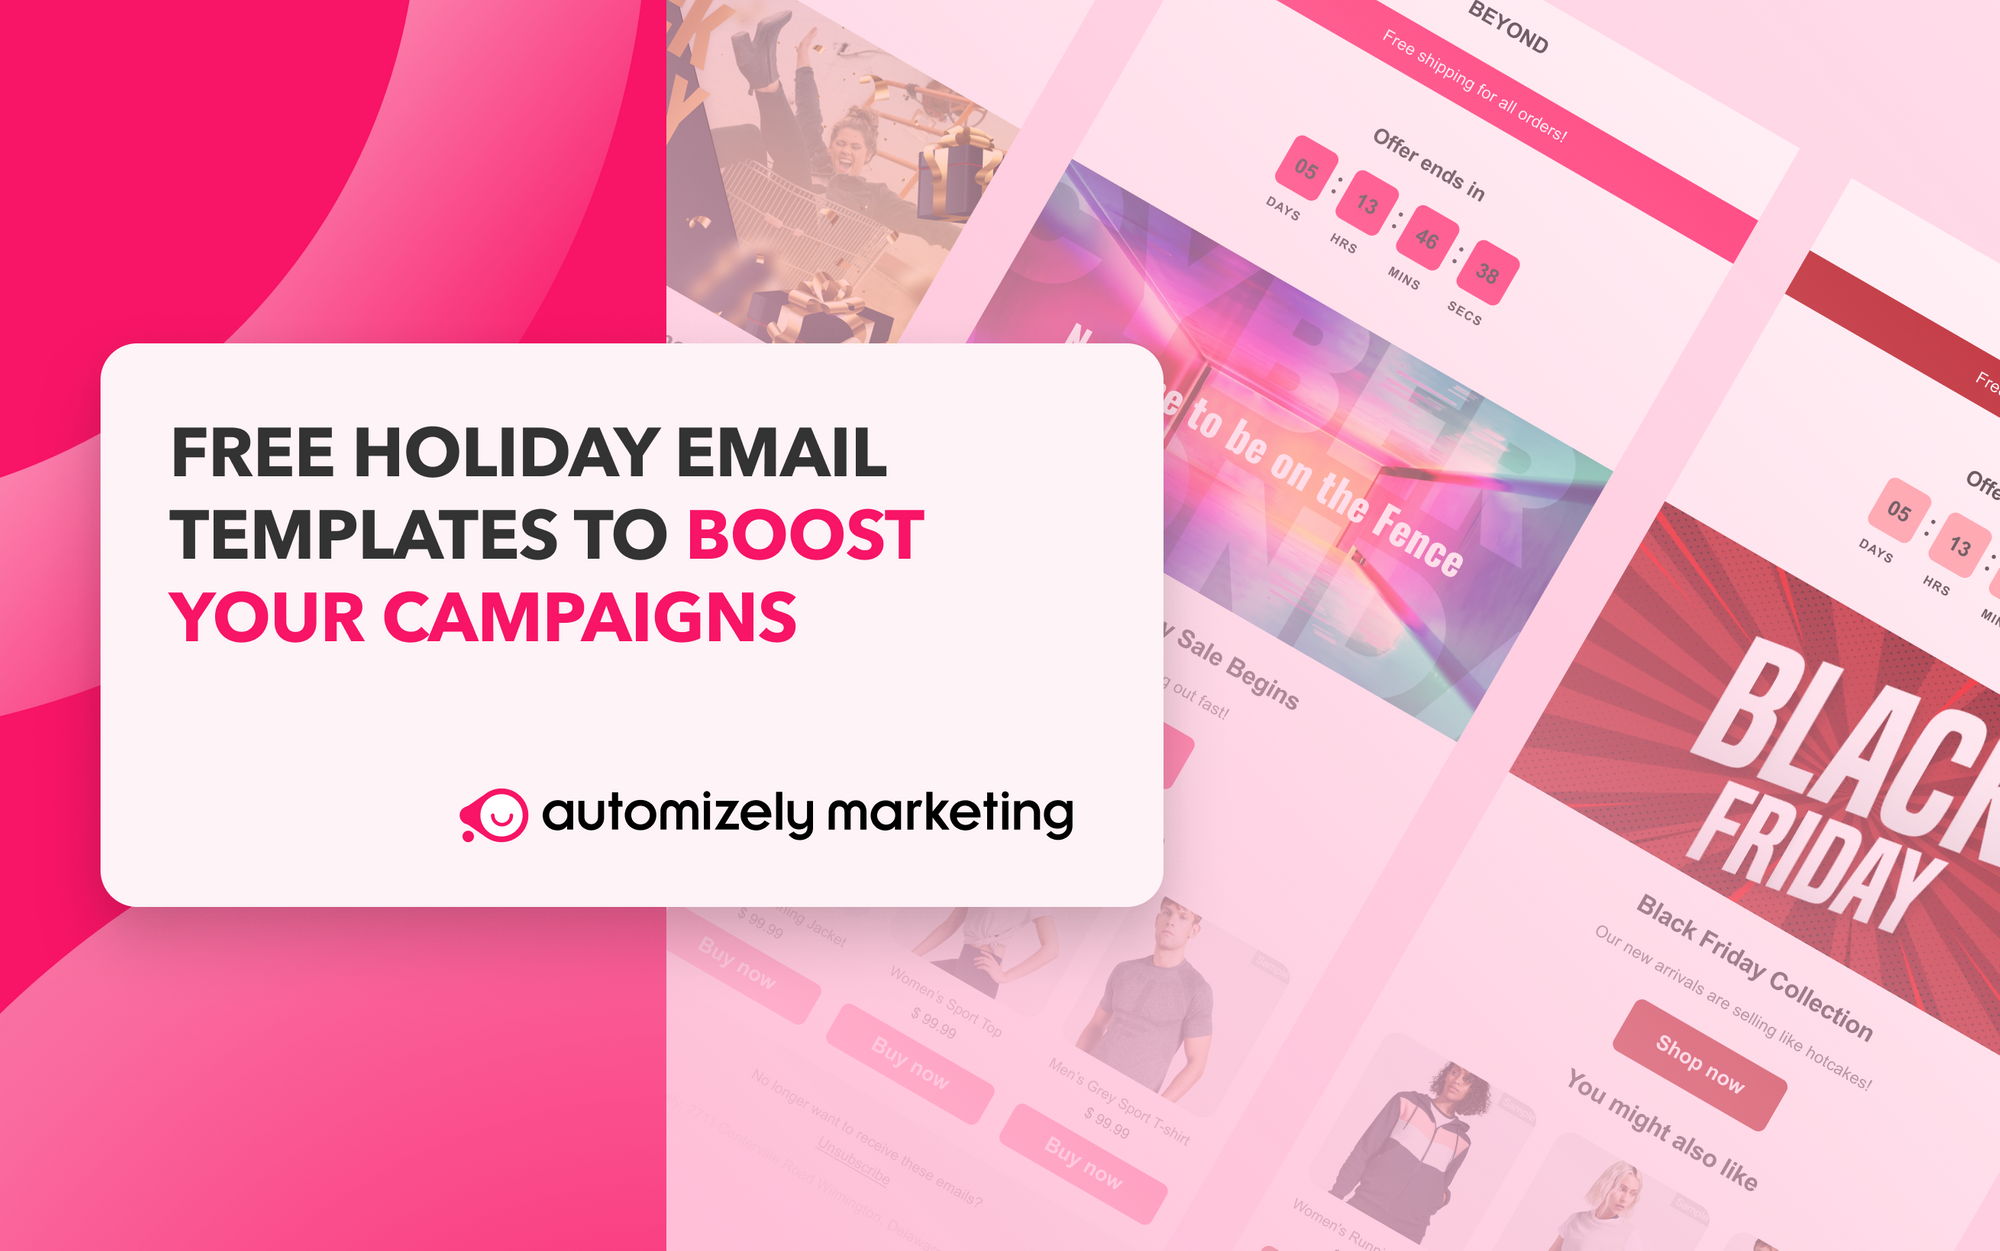 Boost your seasonal campaigns with newly launched holiday email templates